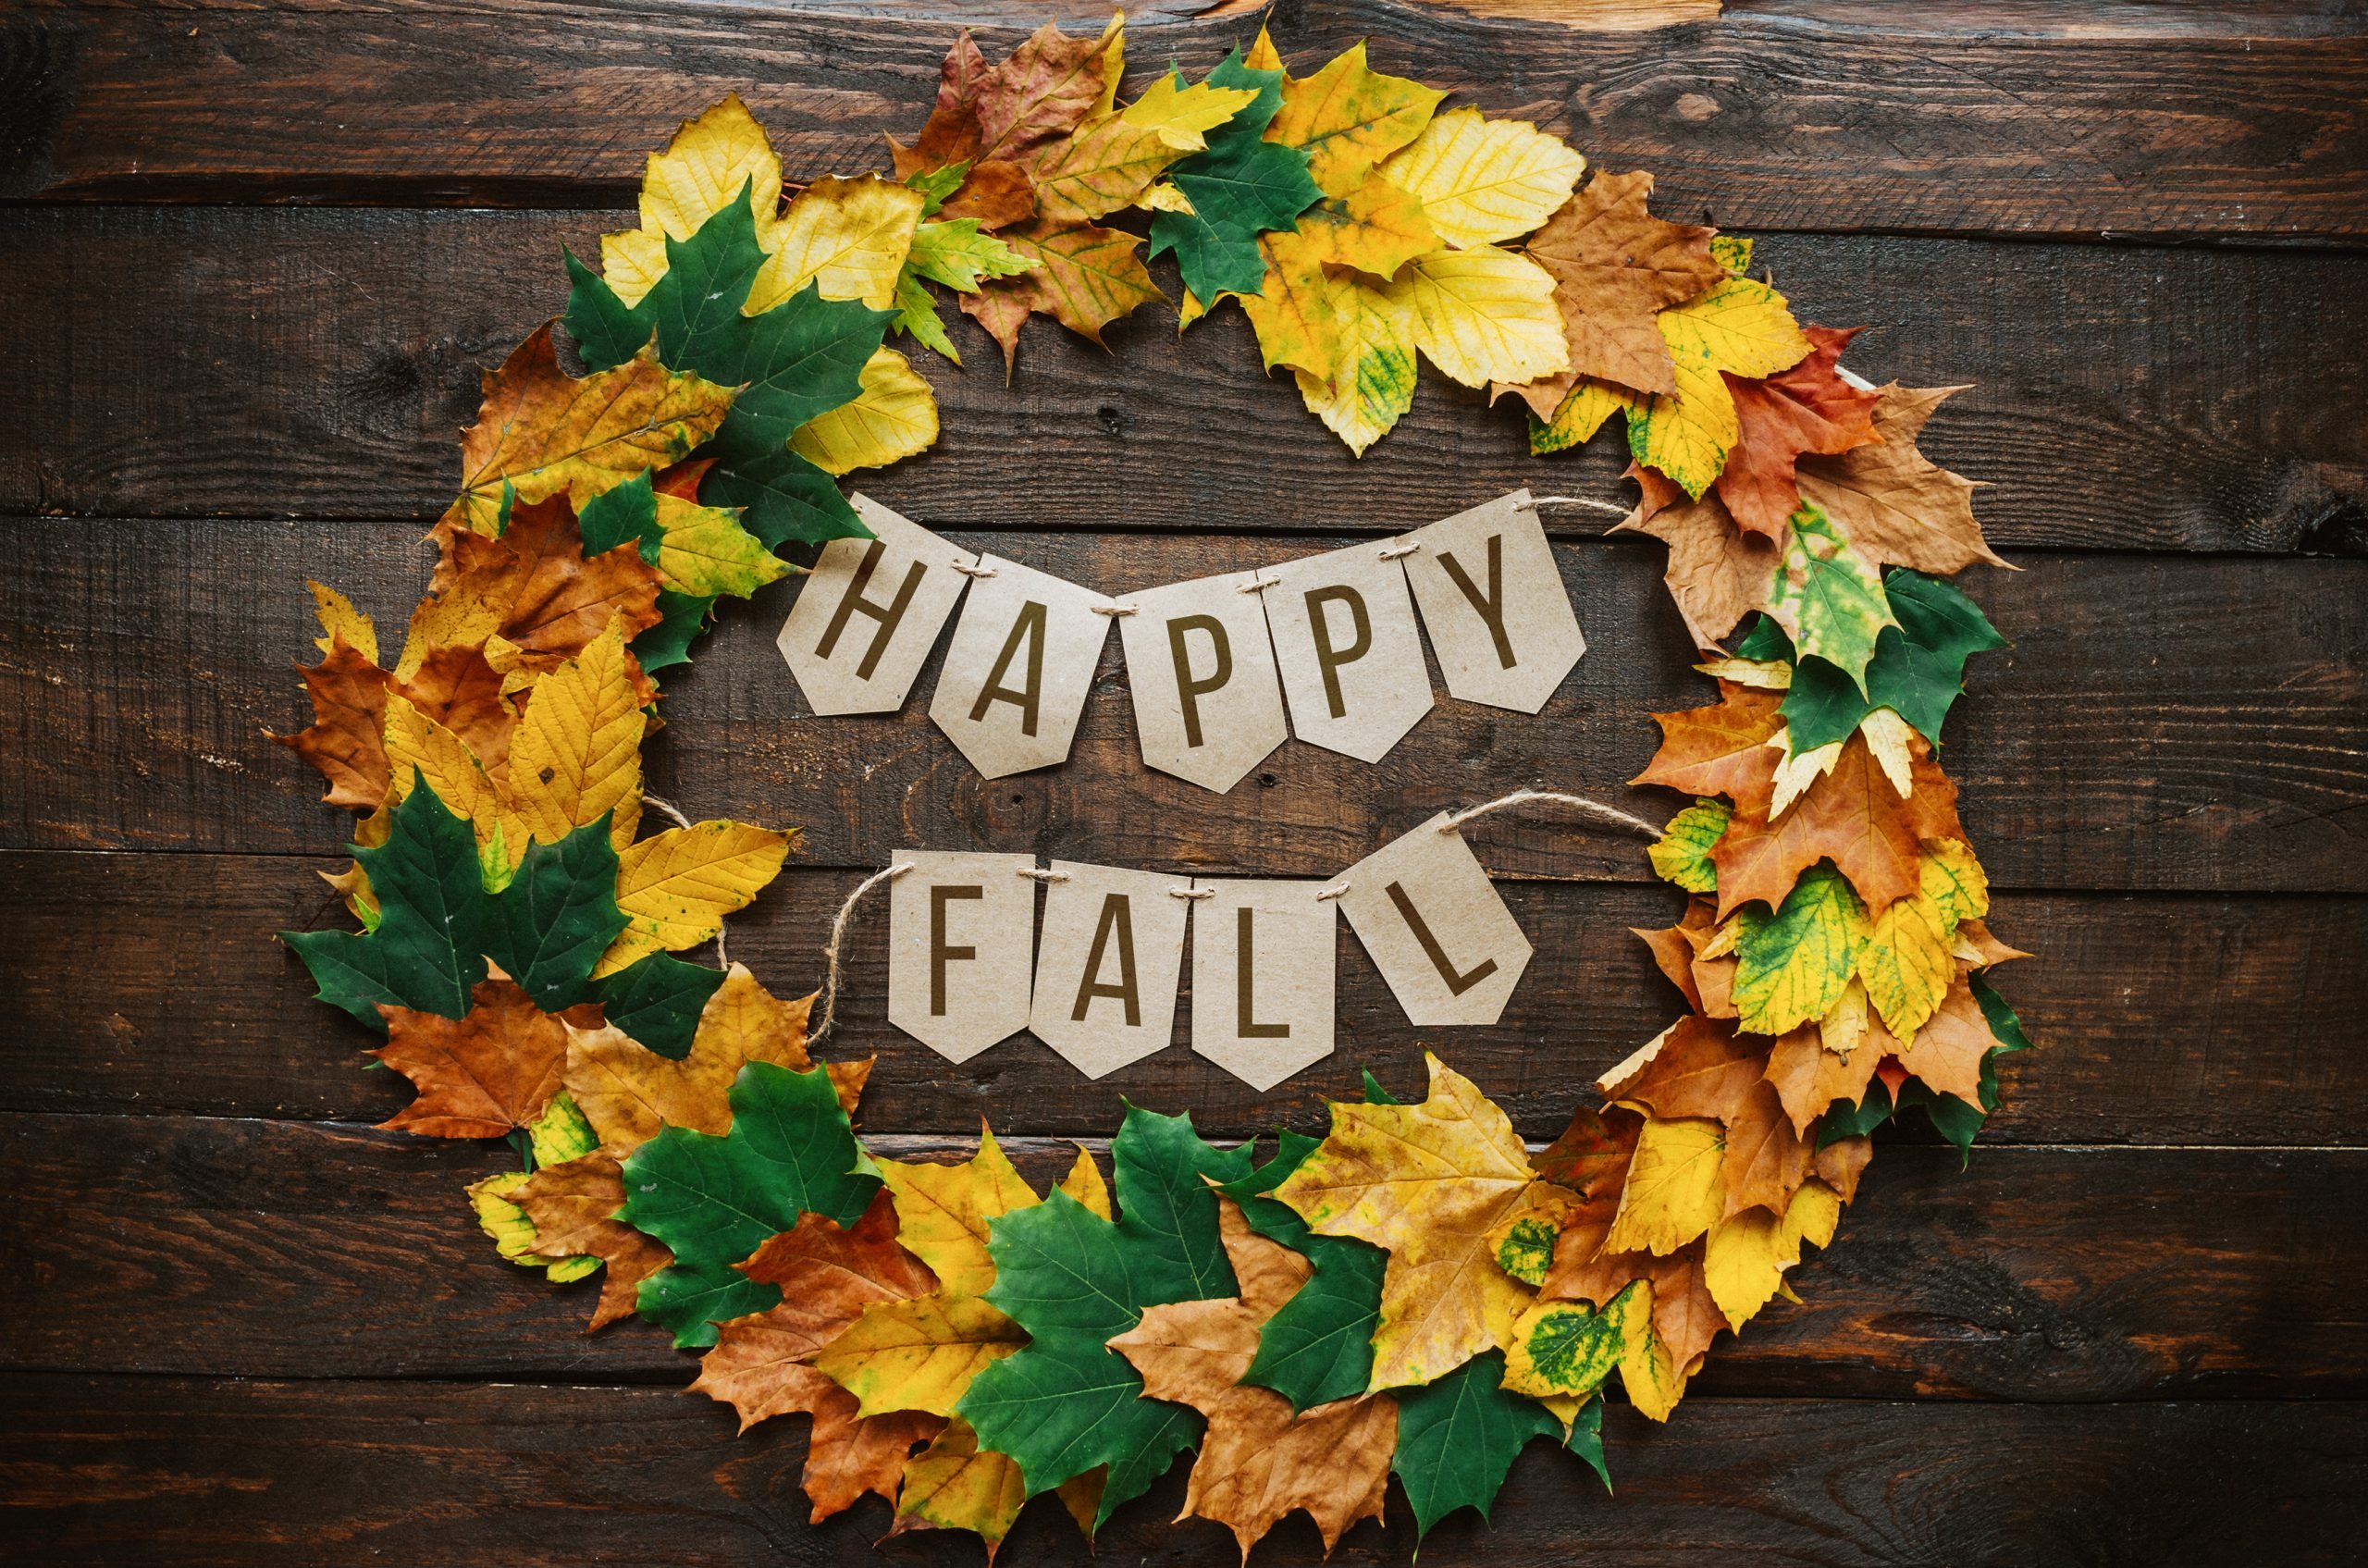 Happy fall lettering on paper cardboard eco garland